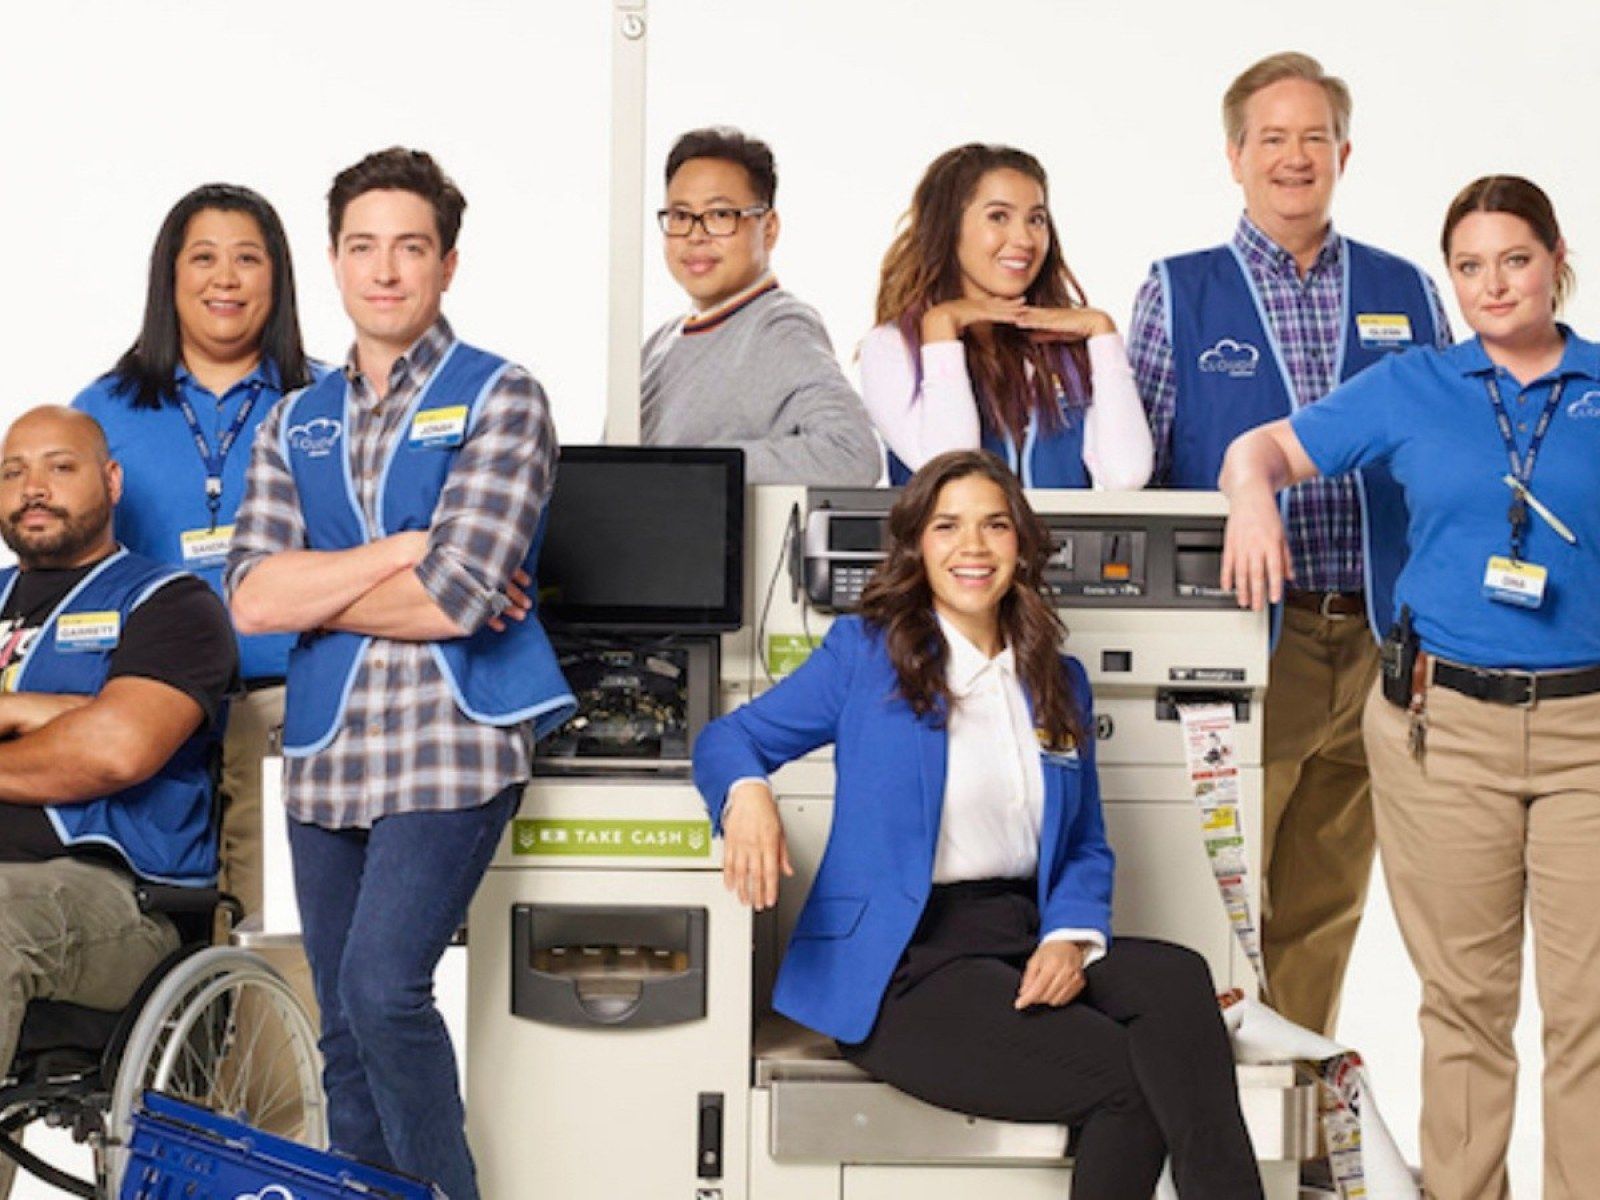 Superstore' Canceled: Cast React As They Film Final Episode